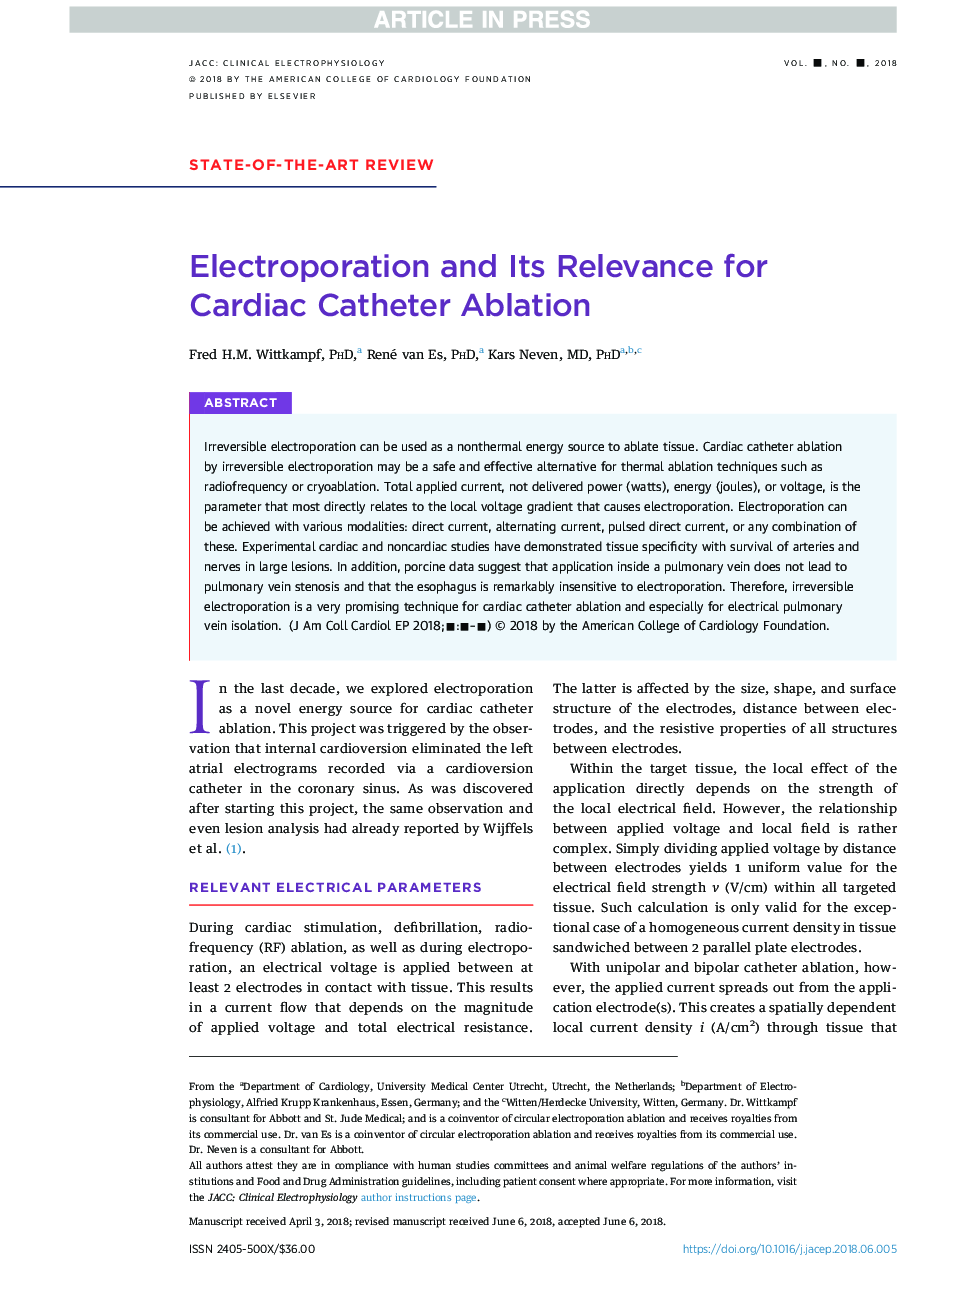 Electroporation and its Relevance for Cardiac Catheter Ablation